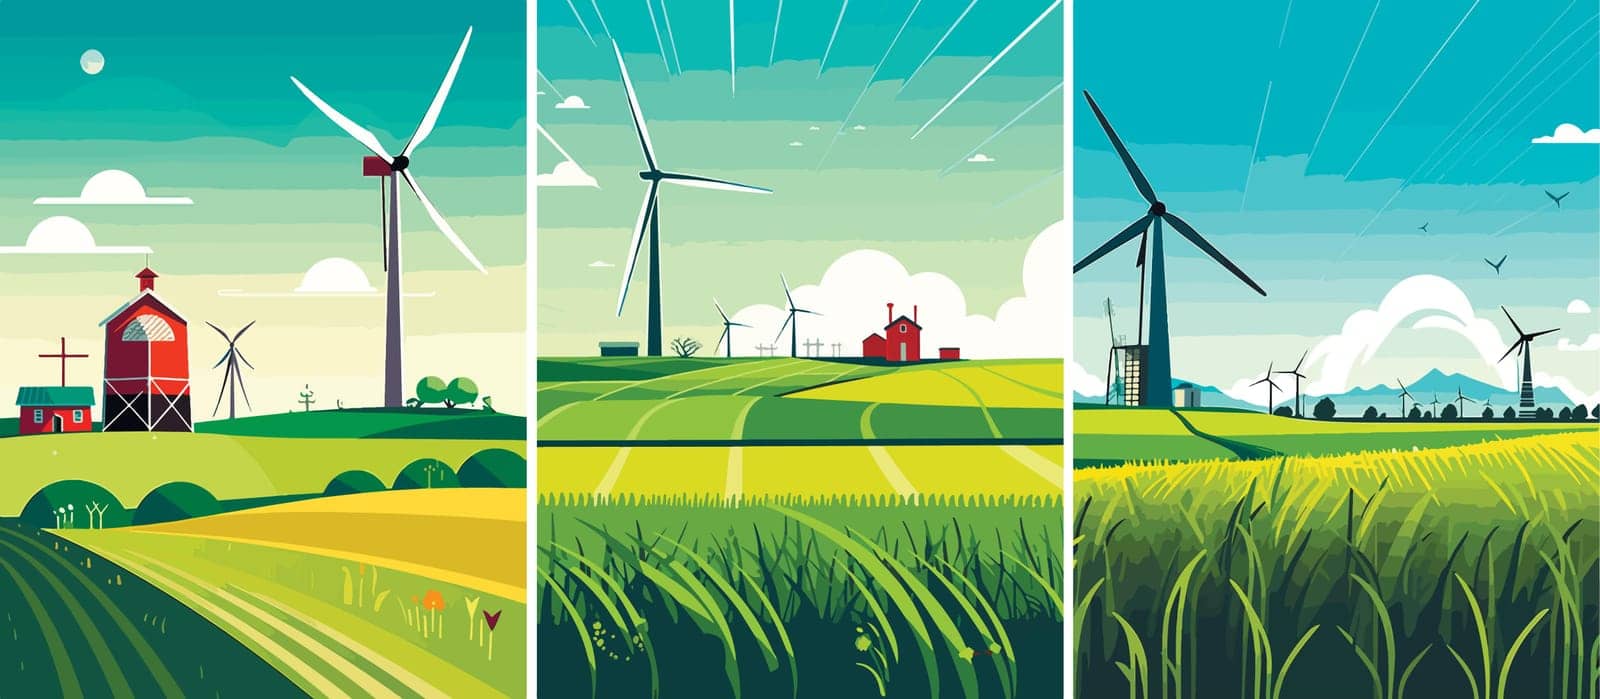 Wind power turbines and windmills vector illustration. A landscape with greenfields and turbines that transforms the kinetic energy in the wind into mechanical power by sergeykoshkin